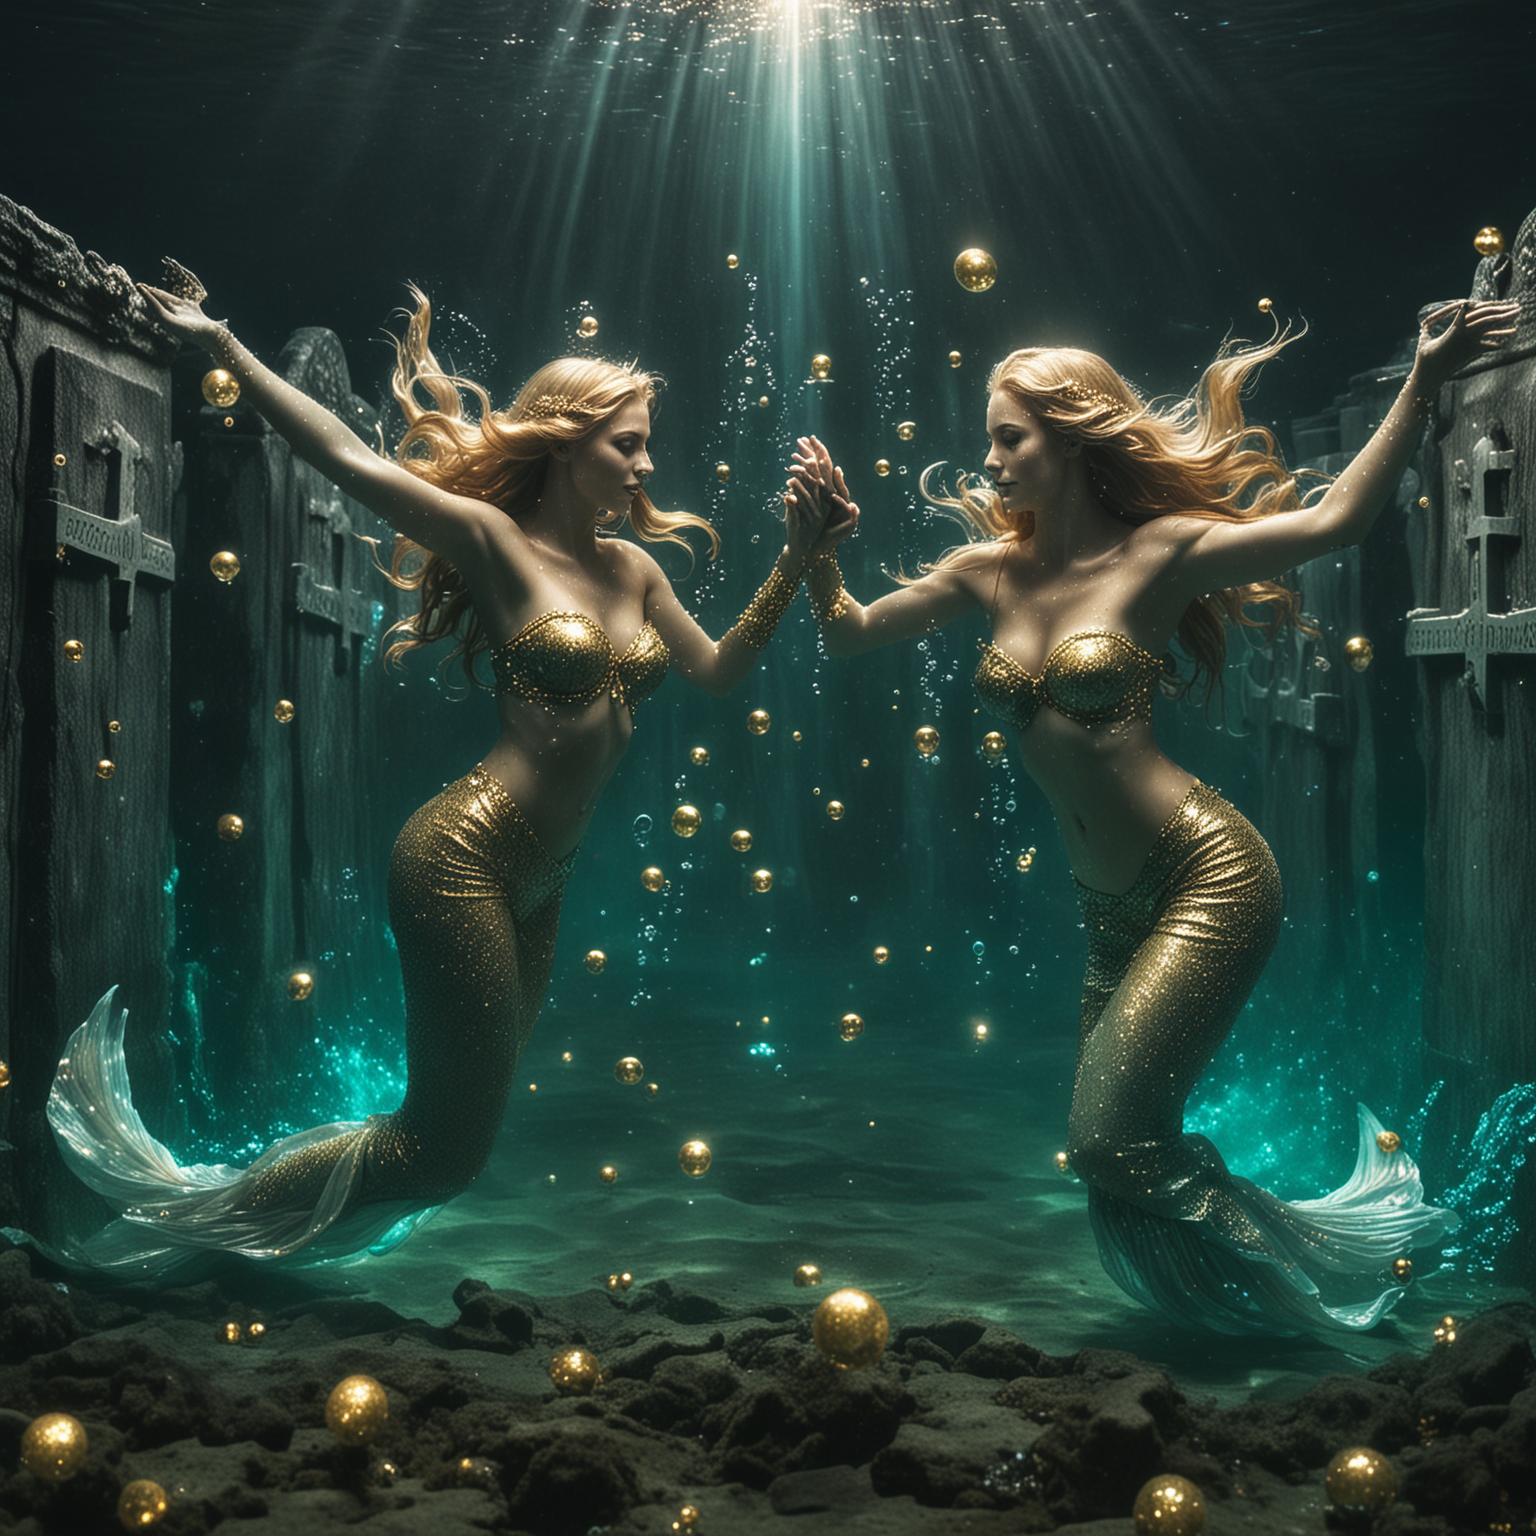 Underwater, two beautiful mermaids,swimming in front of 2 graves, teal, gold, sparkles, bubbles, high lights, contrast 